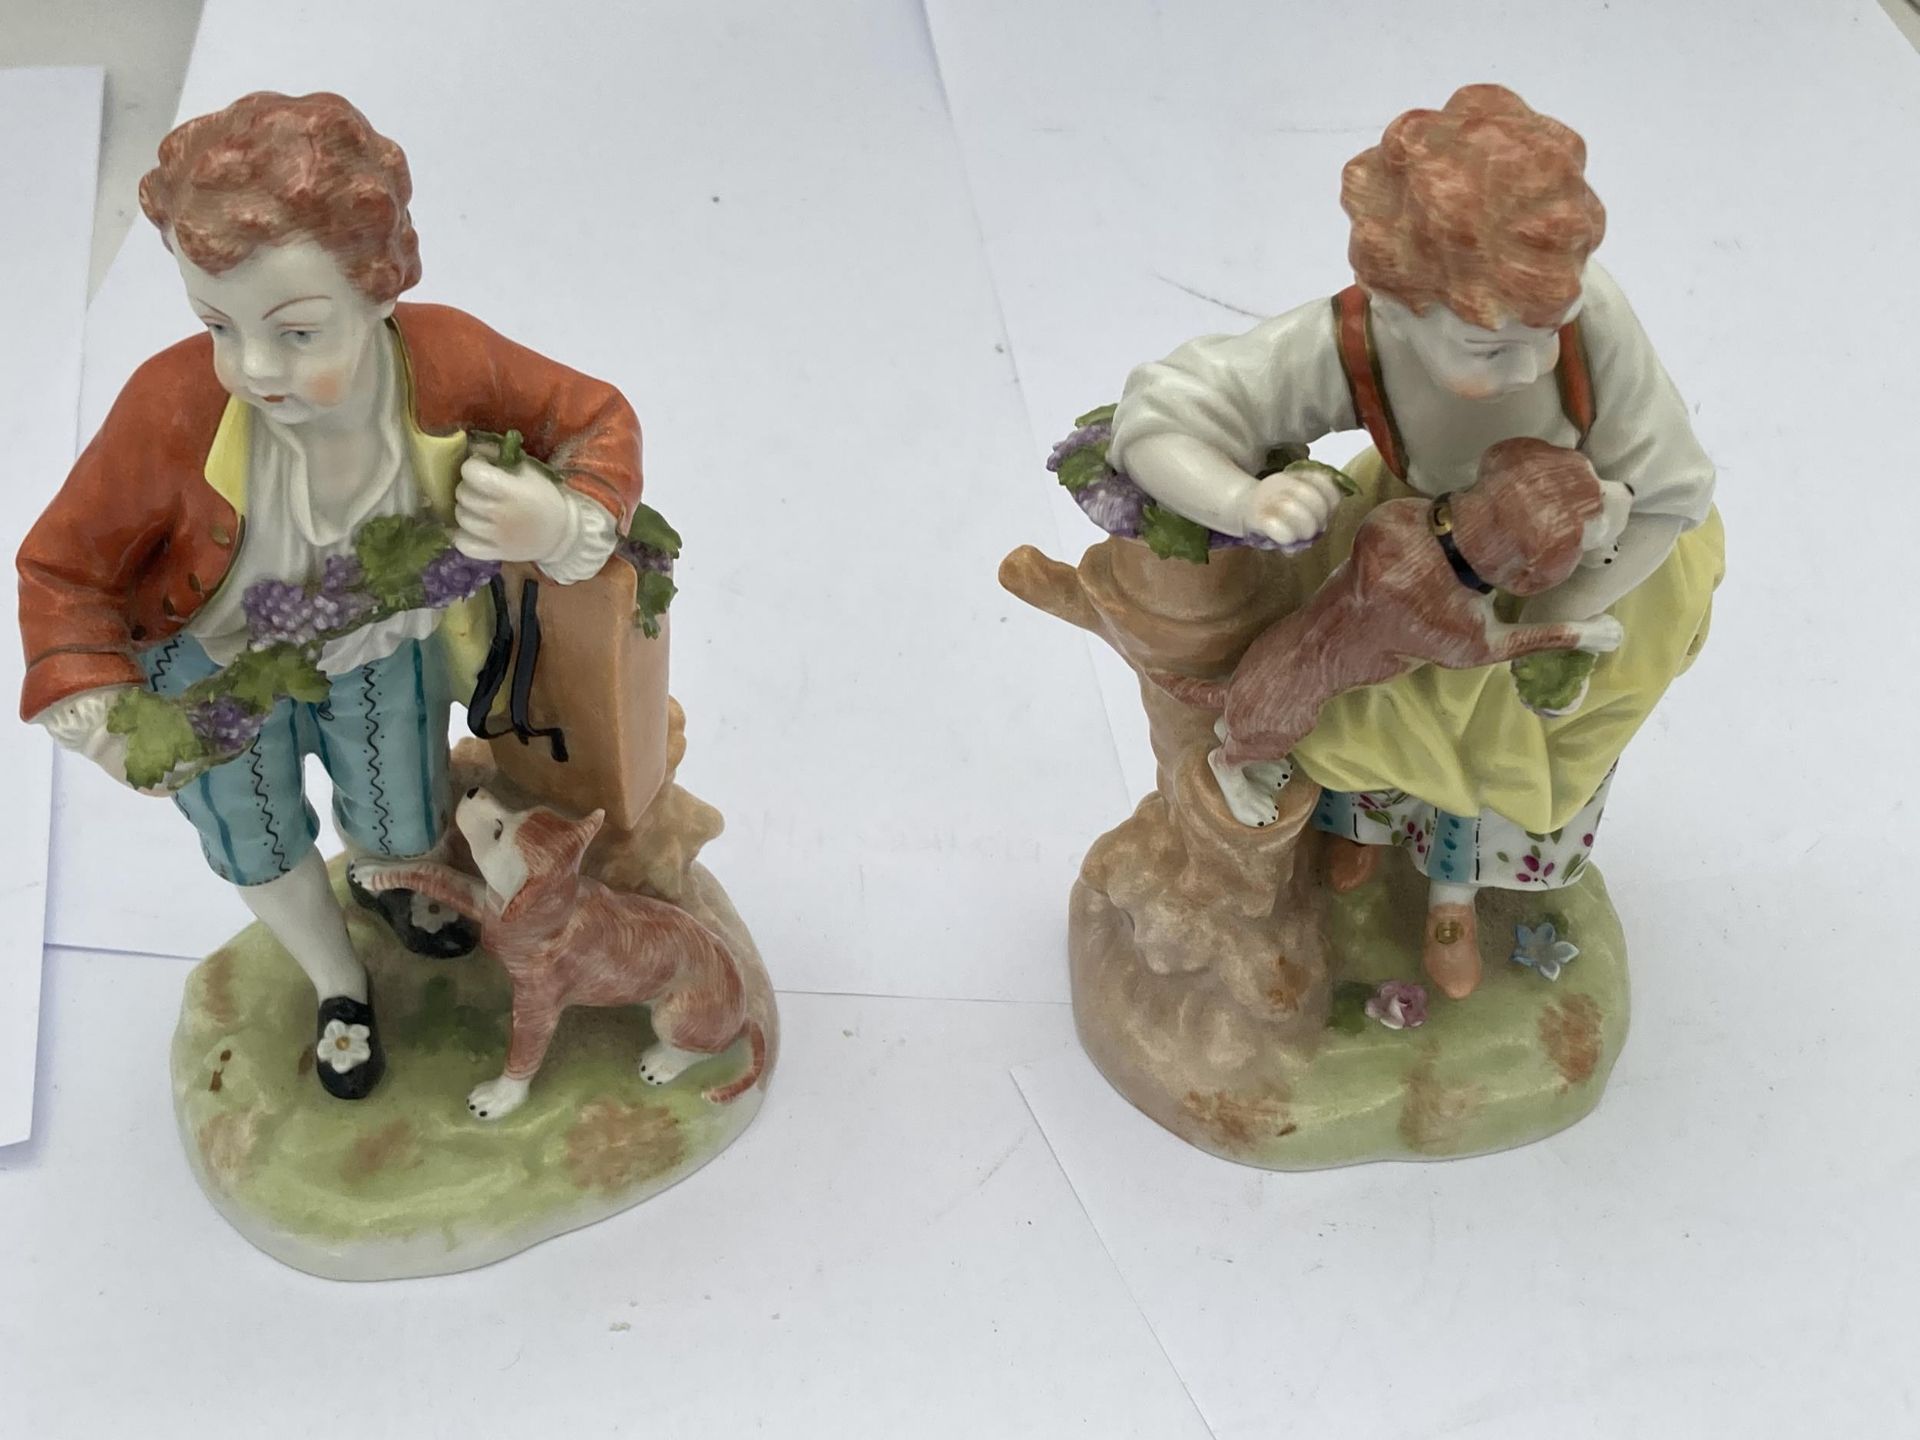 A PAIR OF ANTIQUE CONTINENTAL DRESDEN FIGURES OF BOHYS WITH DOGS, IMPRESSED MARKS TO BASE